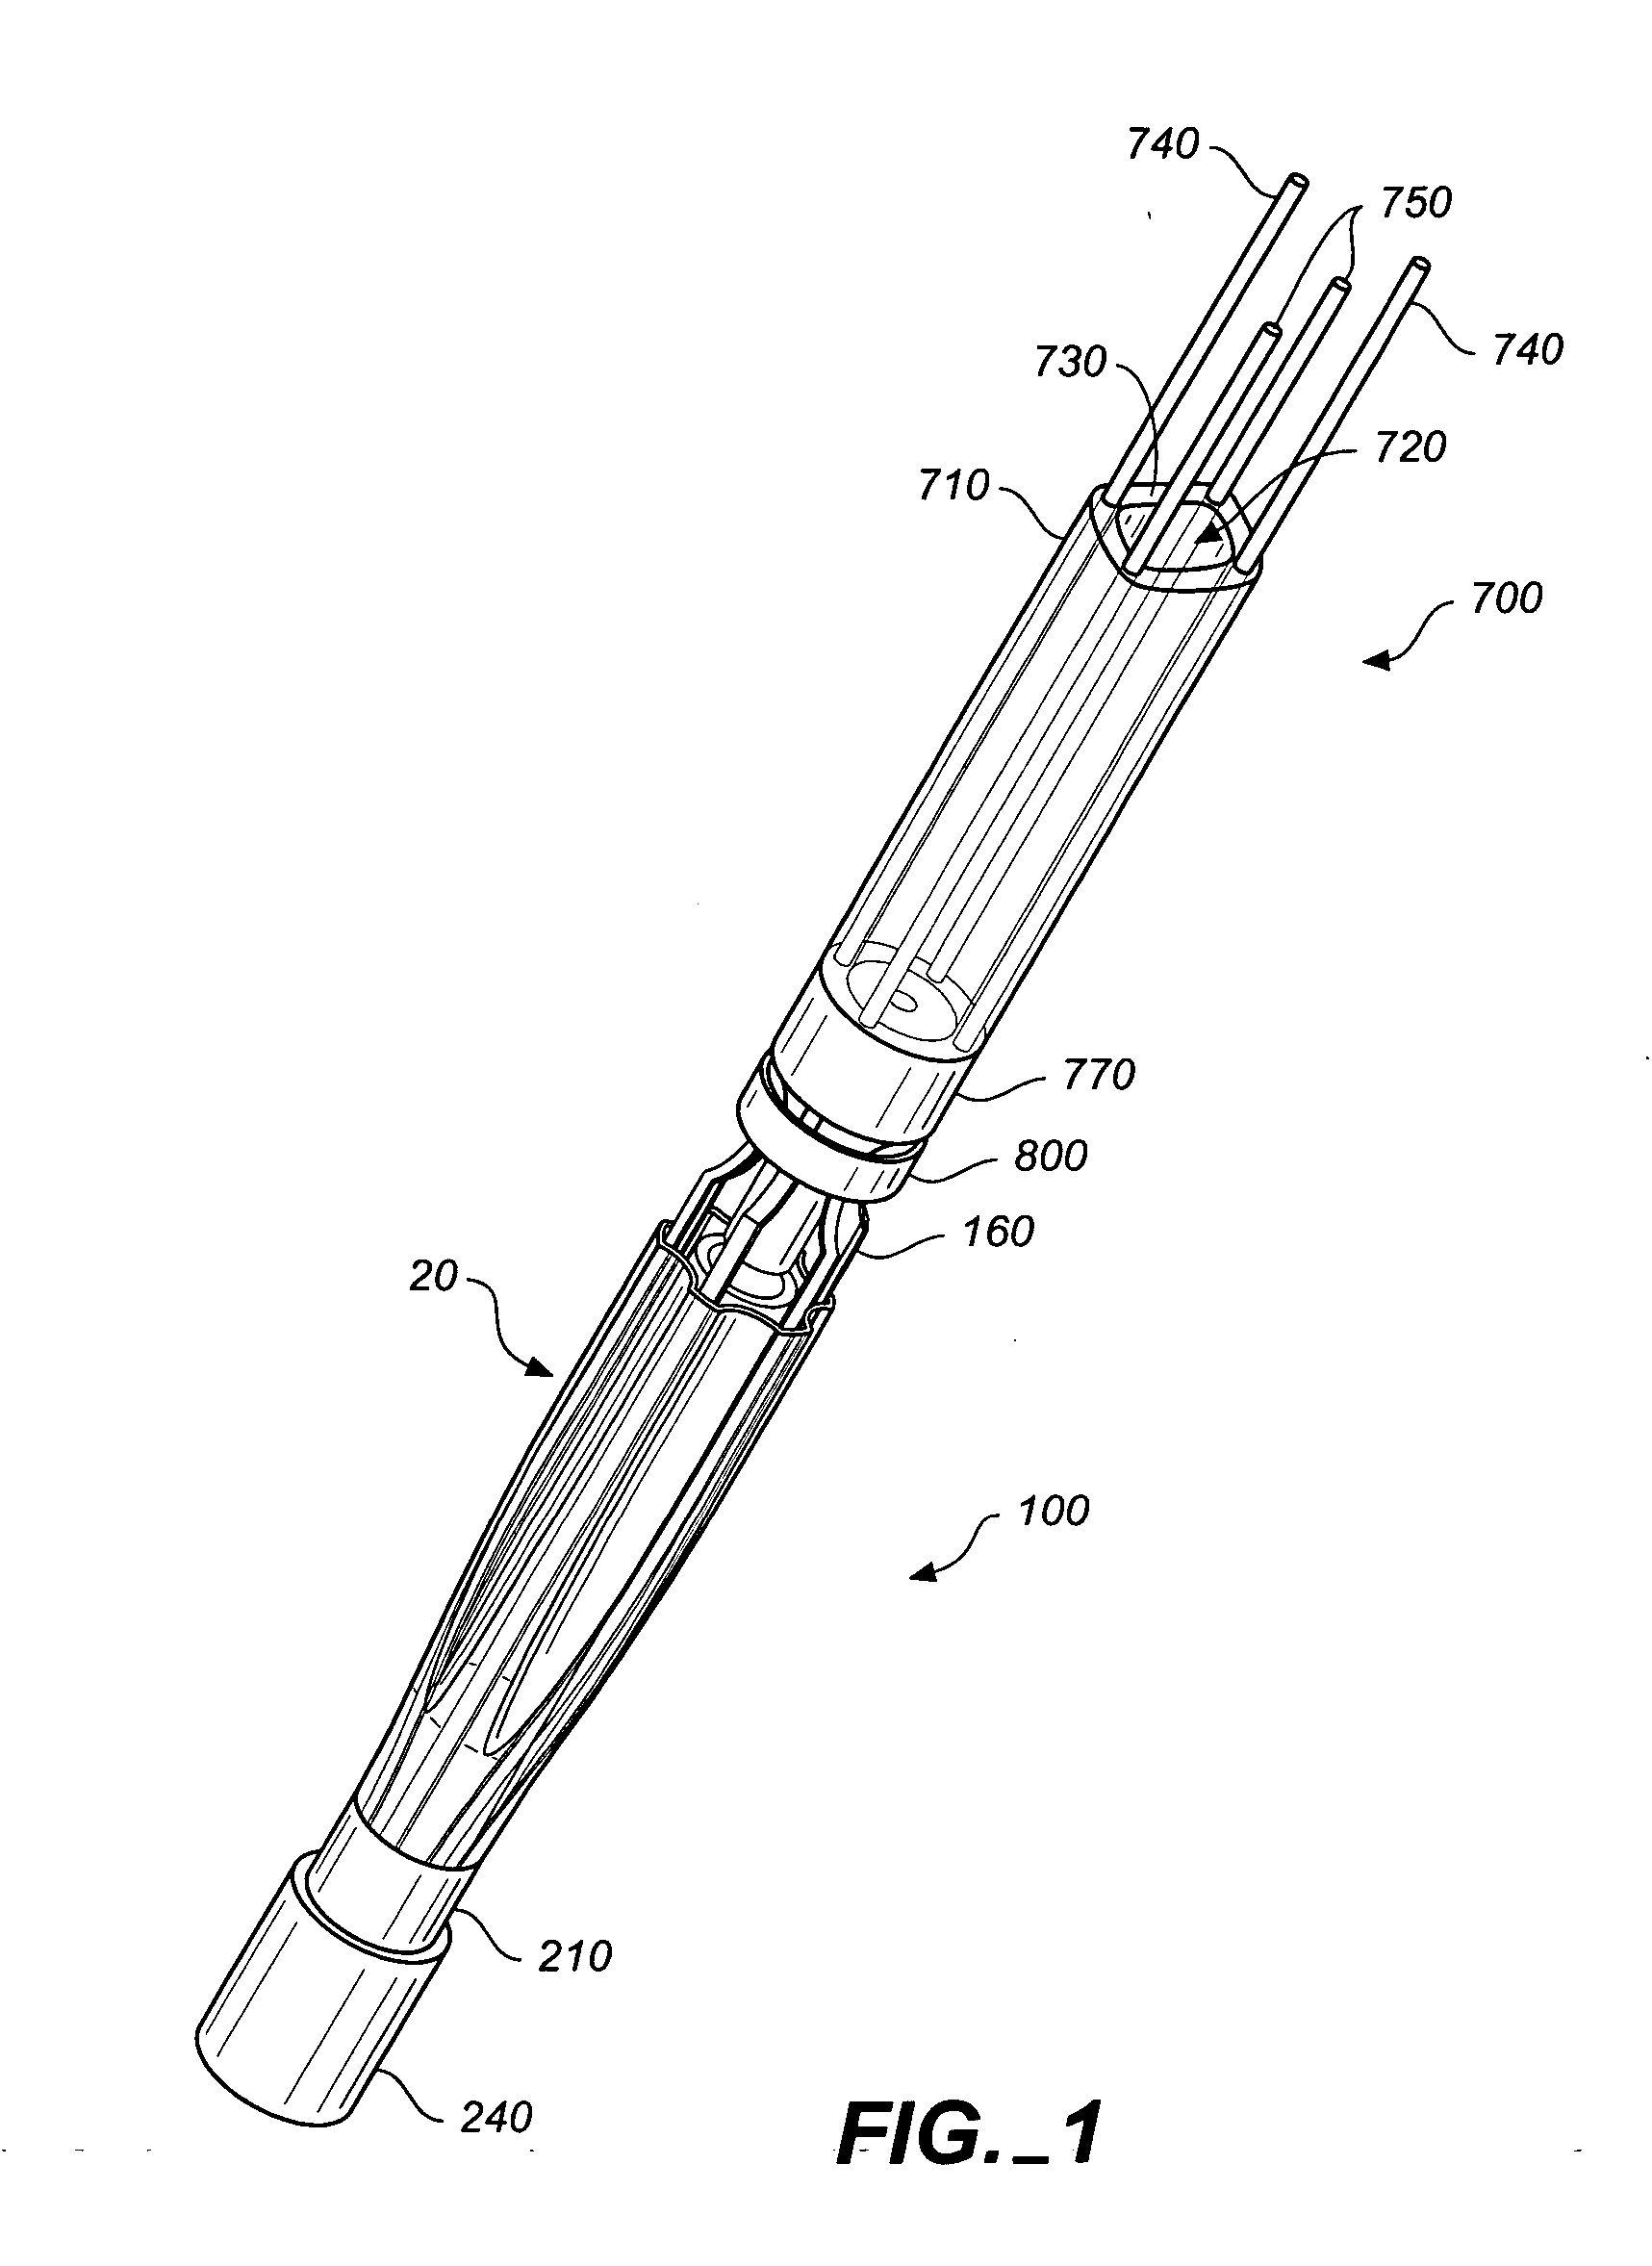 Intra-bronchial apparatus for aspiration and insufflation of lung regions distal to placement or cross communication and deployment and placement system therefor